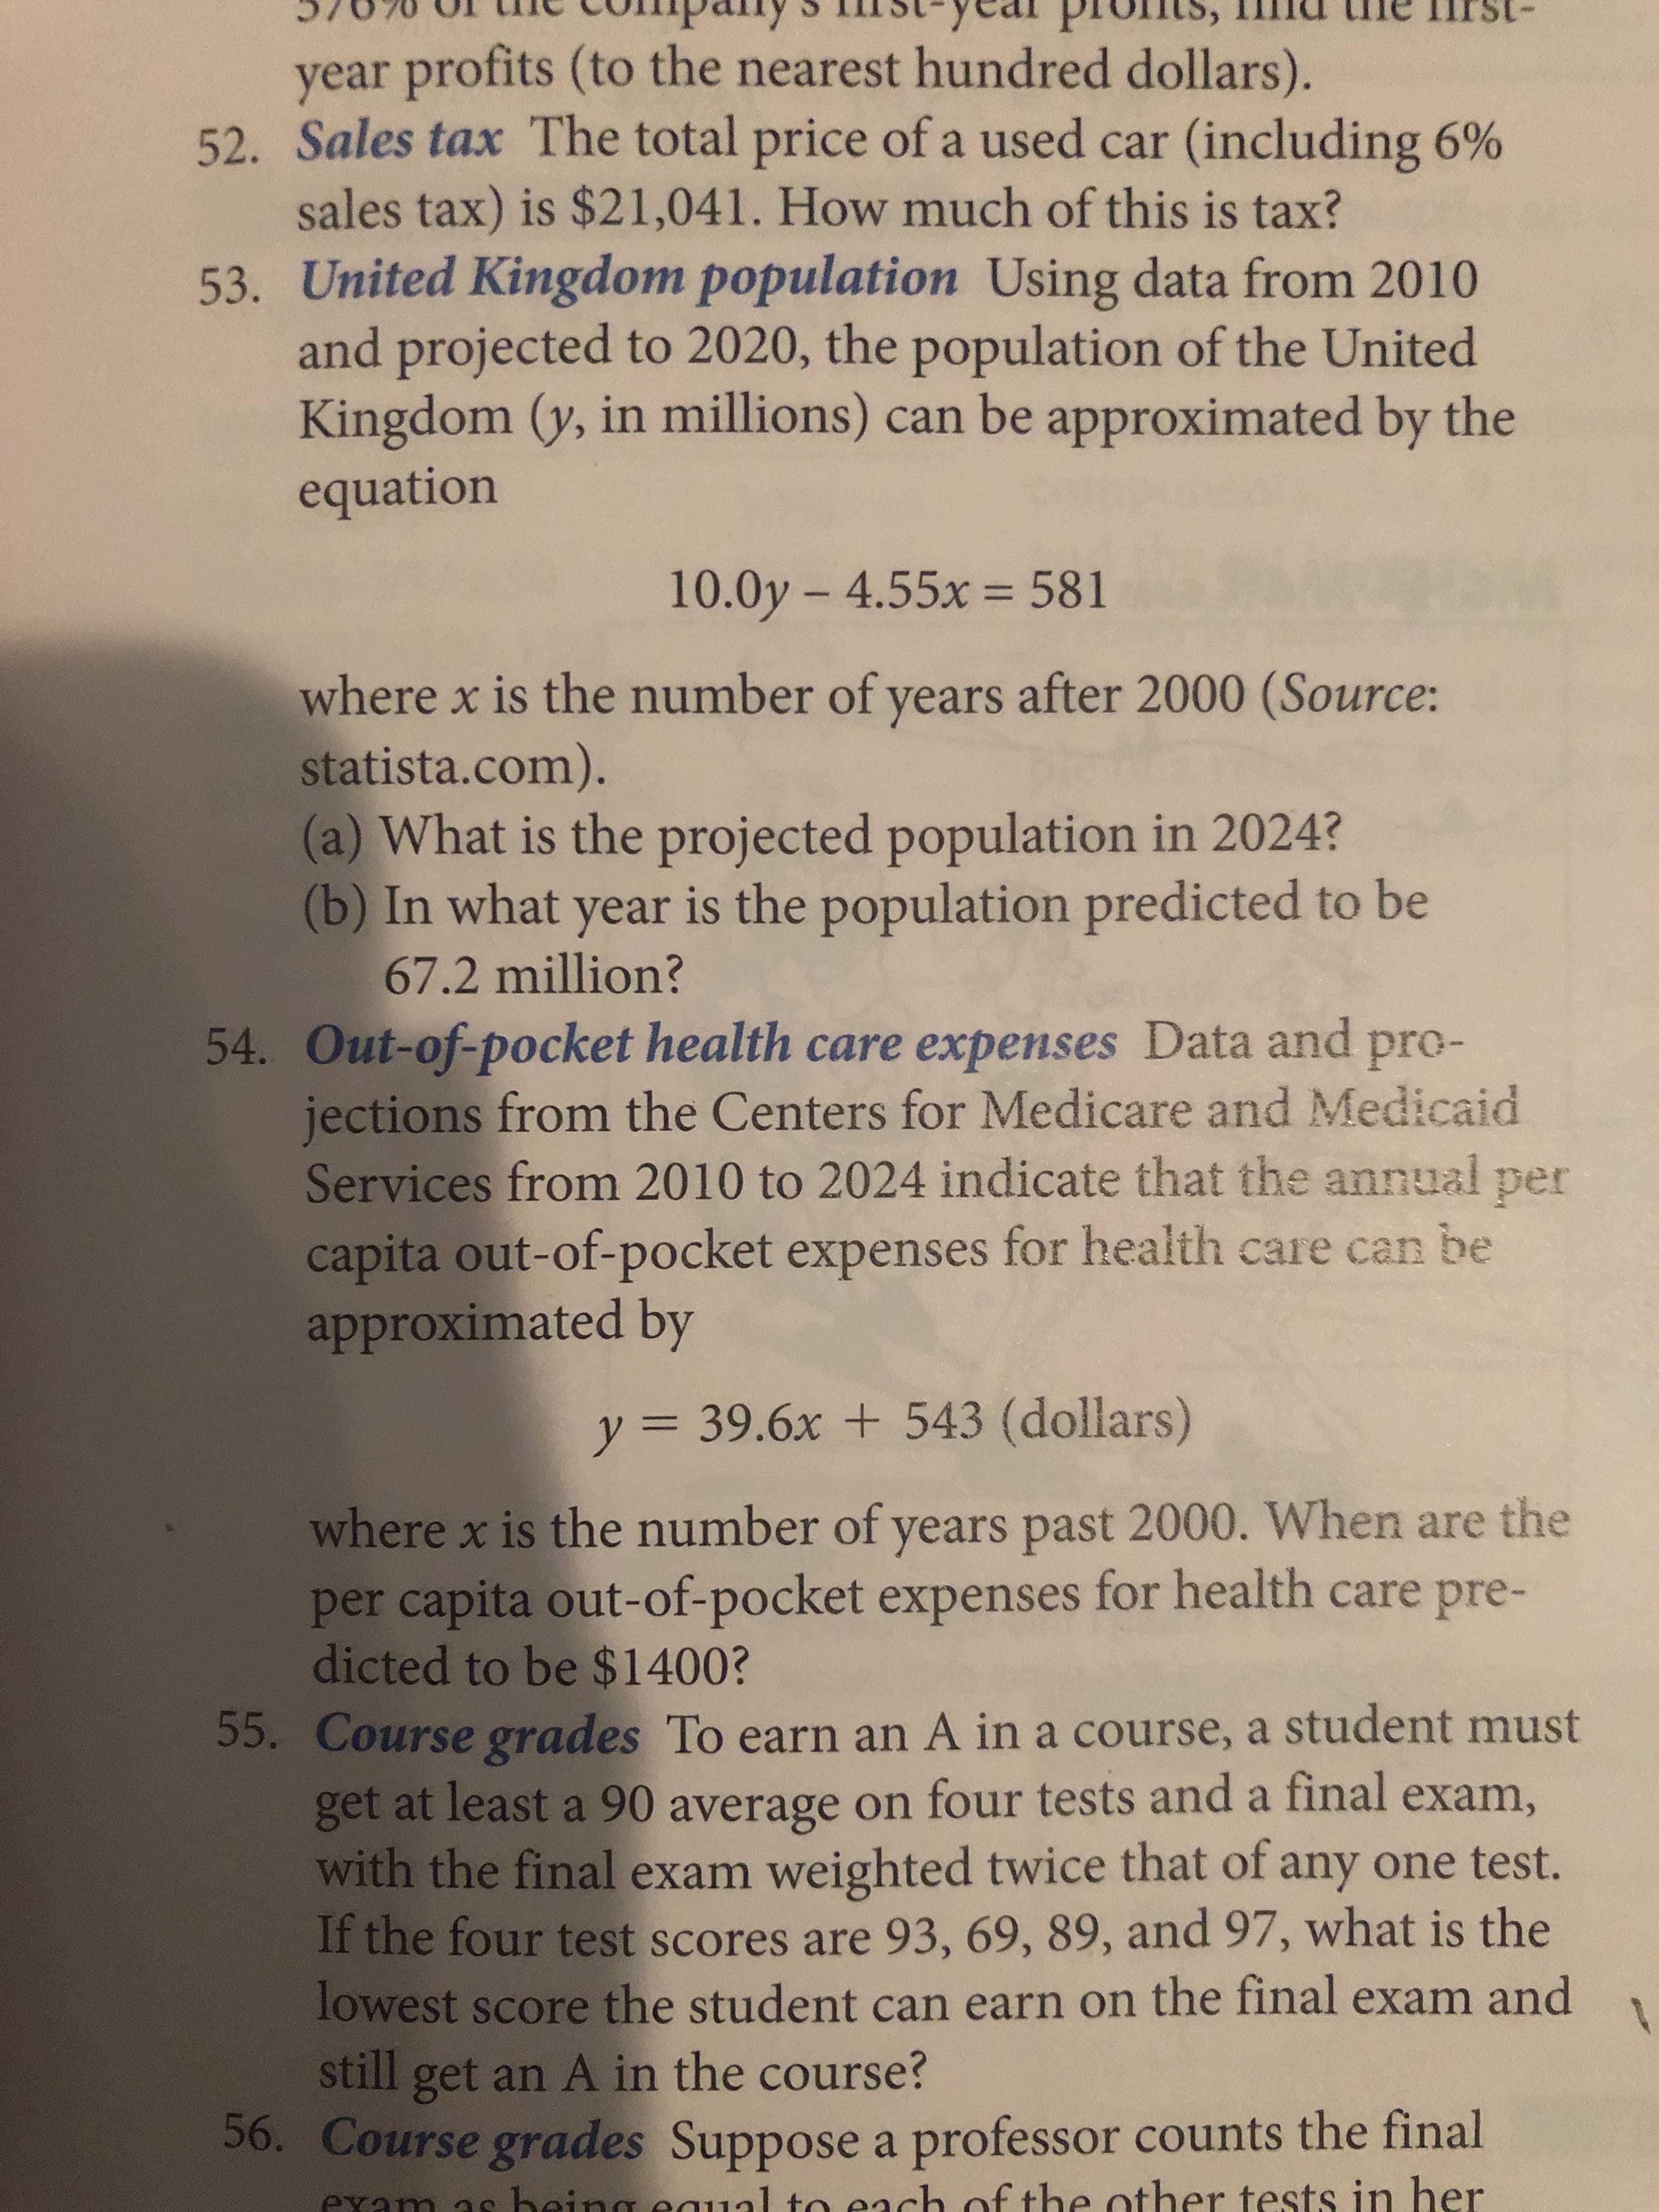 54. Out-of-pocket health care expenses Data and pro-
jections from the Centers for Medicare and Medicaid
Services from 2010 to 2024 indicate that the annual
per
capita out-of-pocket expenses for health care can be
approximated by
y = 39.6x + 543 (dollars)
%3D
where x is the number of years past 2000. When are the
per capita out-of-pocket expenses for health care pre-
dictod to be $1400?
